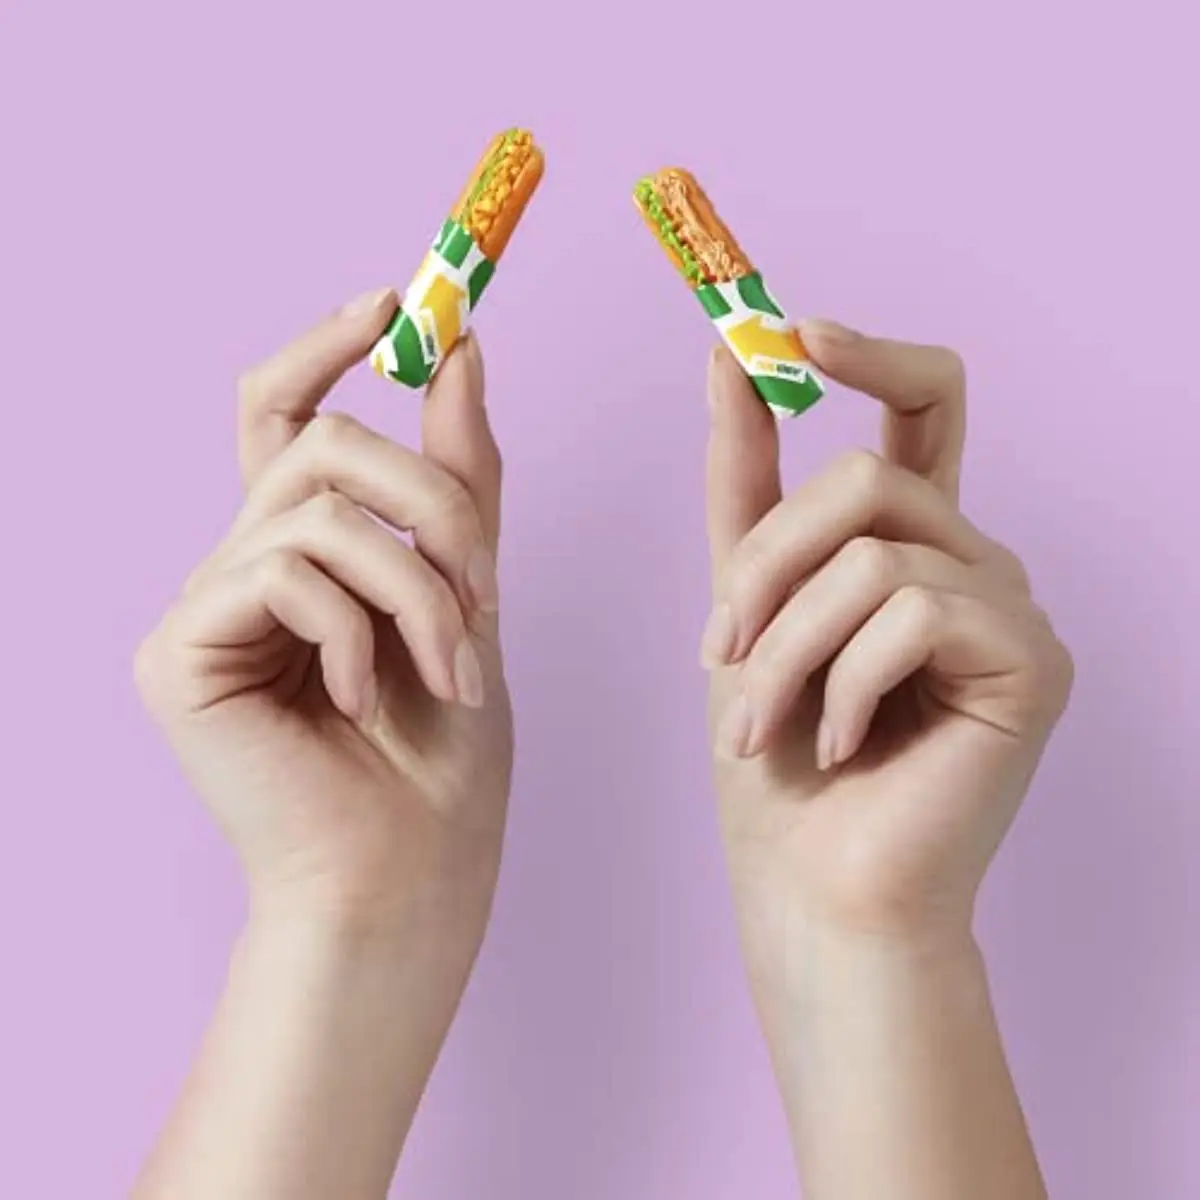 ZURU Launches 5 Surprise Foodie Mini Brands Inspired by Fast-Food